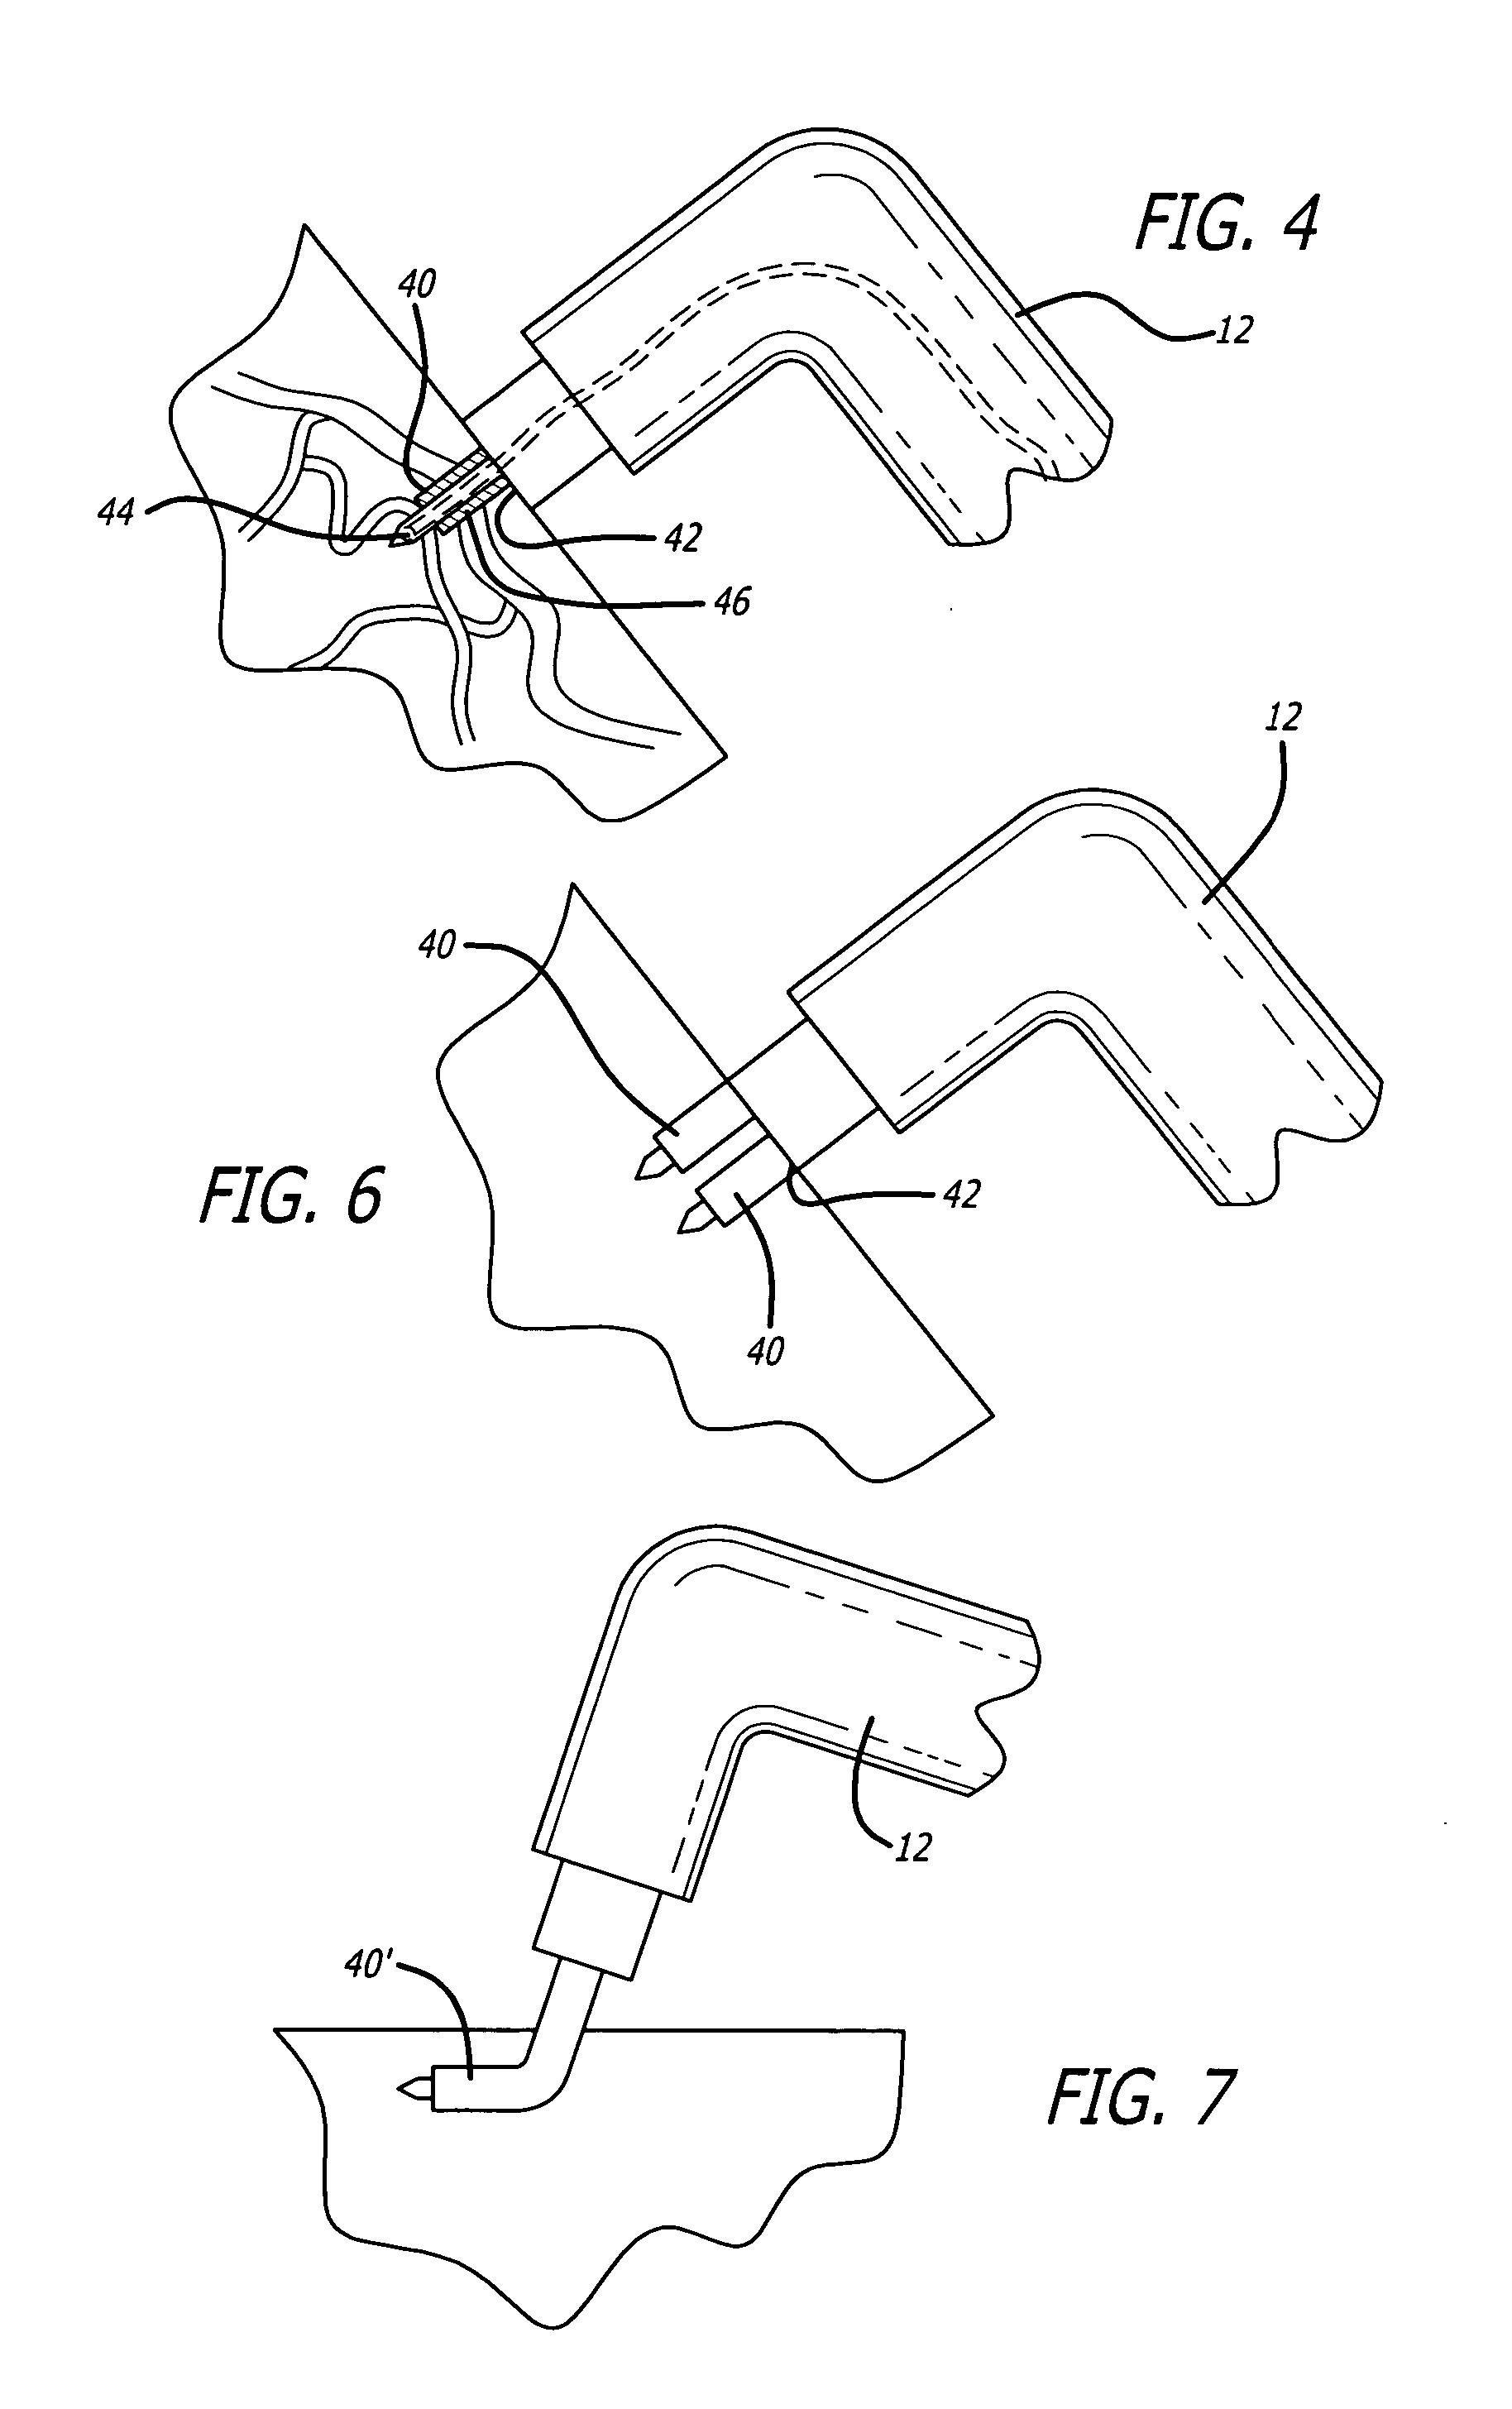 Method and apparatus to reduce wrinkles through application of radio frequency energy to nerves